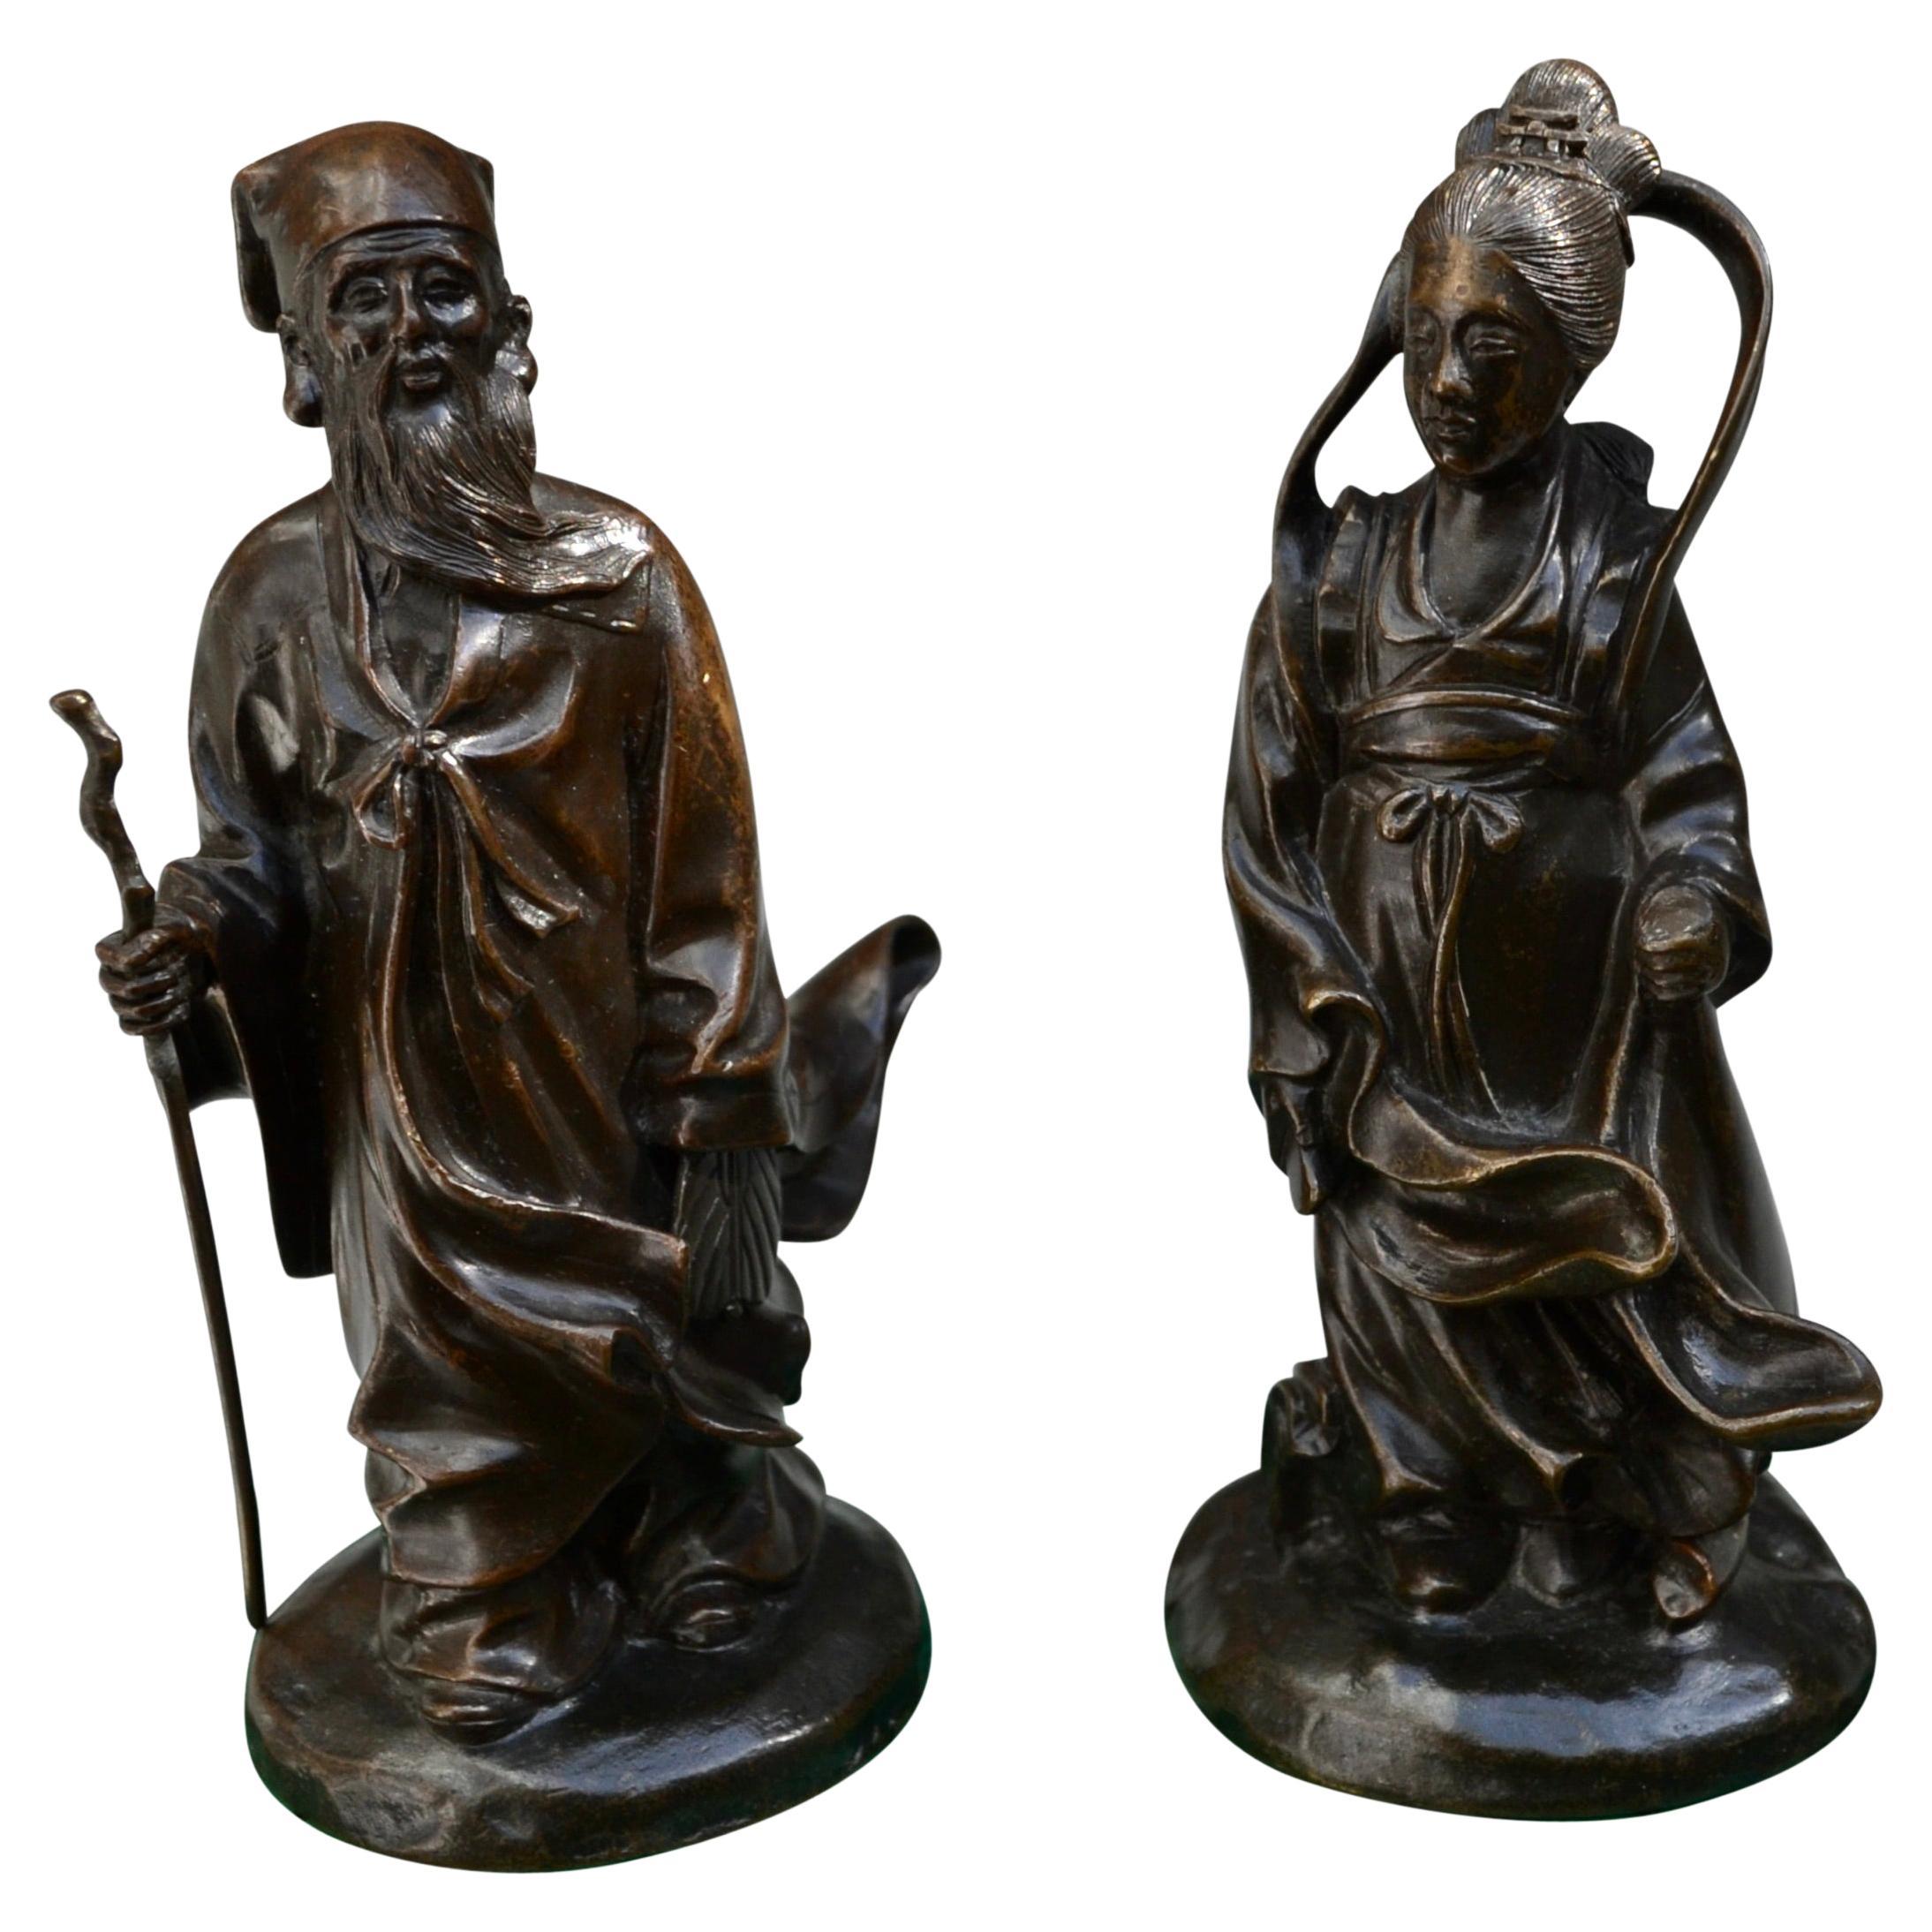 A Pair of Small 19 Century Chinese Patinated Bronze Statues of Gods or Deities   For Sale